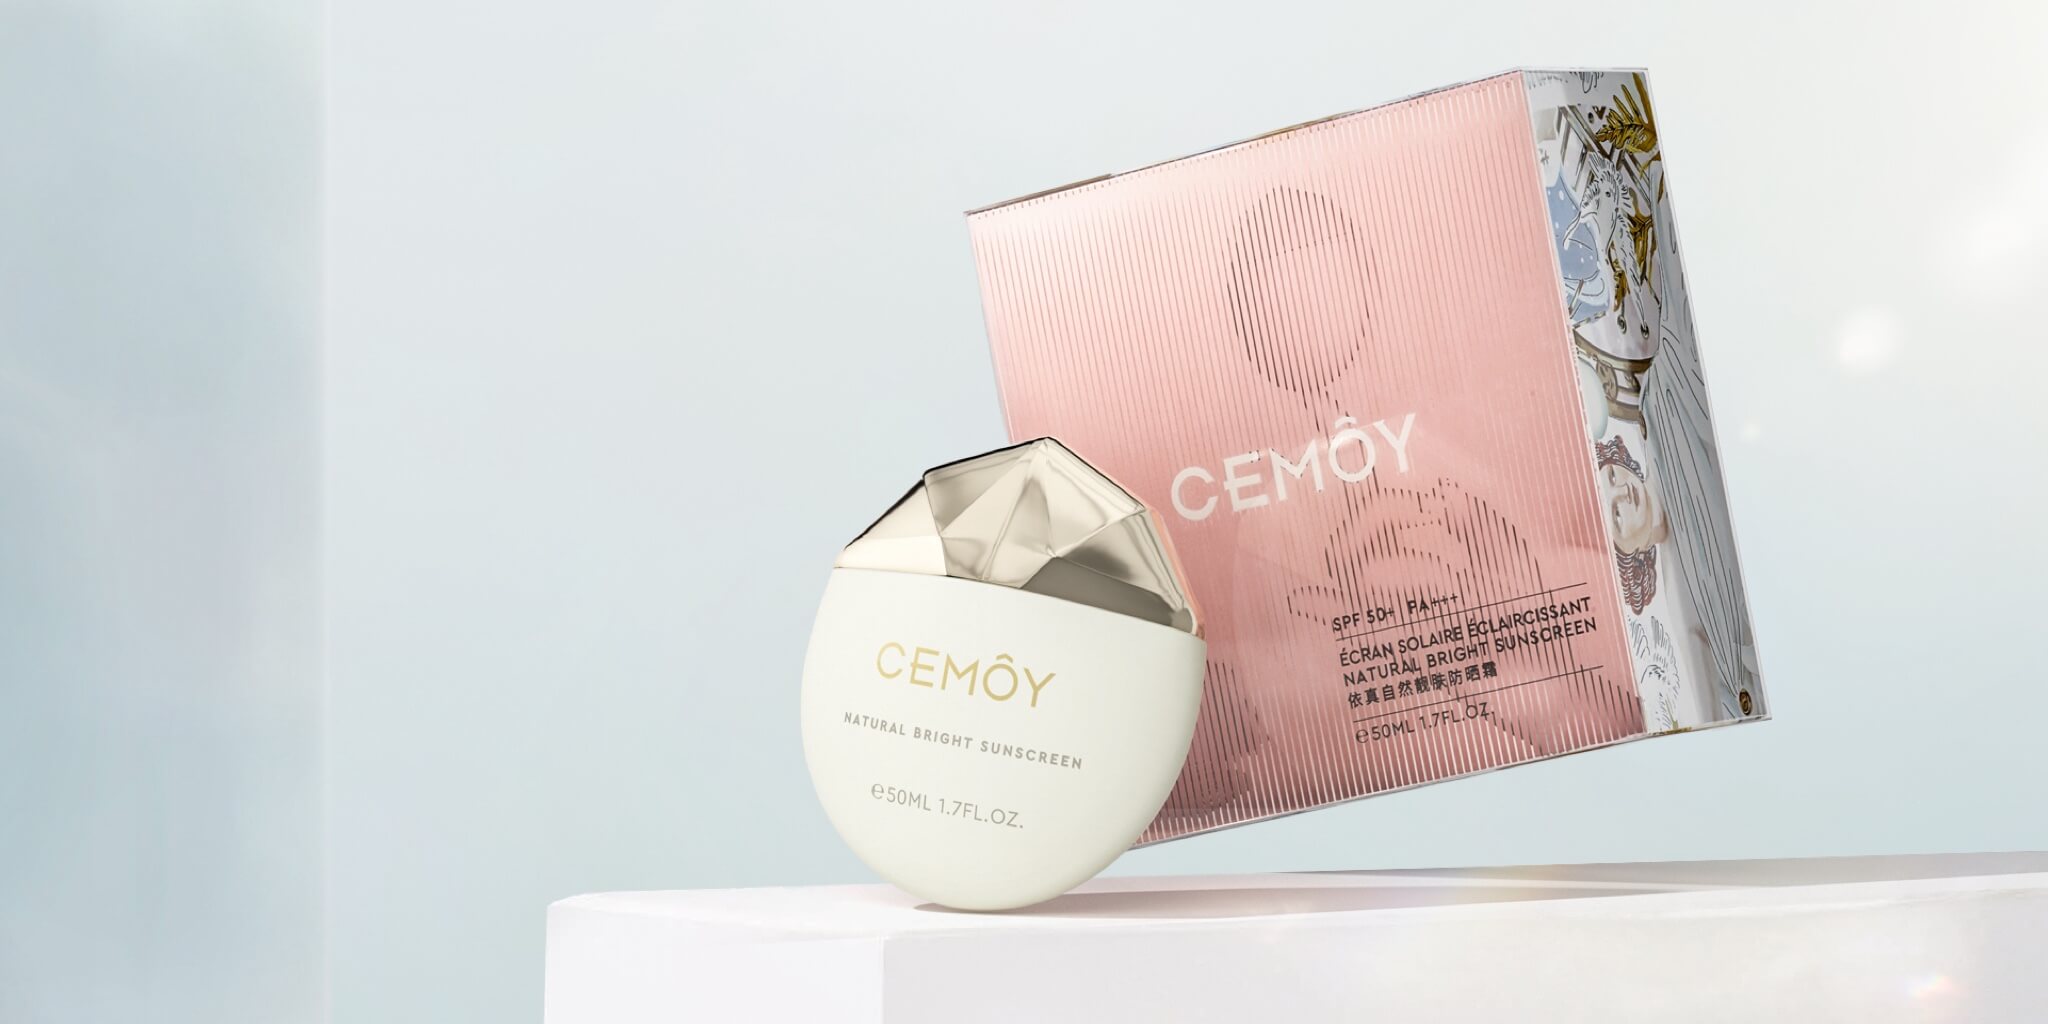 //cemoy.com/uploads/2022/10/CEMOY_PRODUCT_Natural-bright-sunscreen_R4-img.jpg